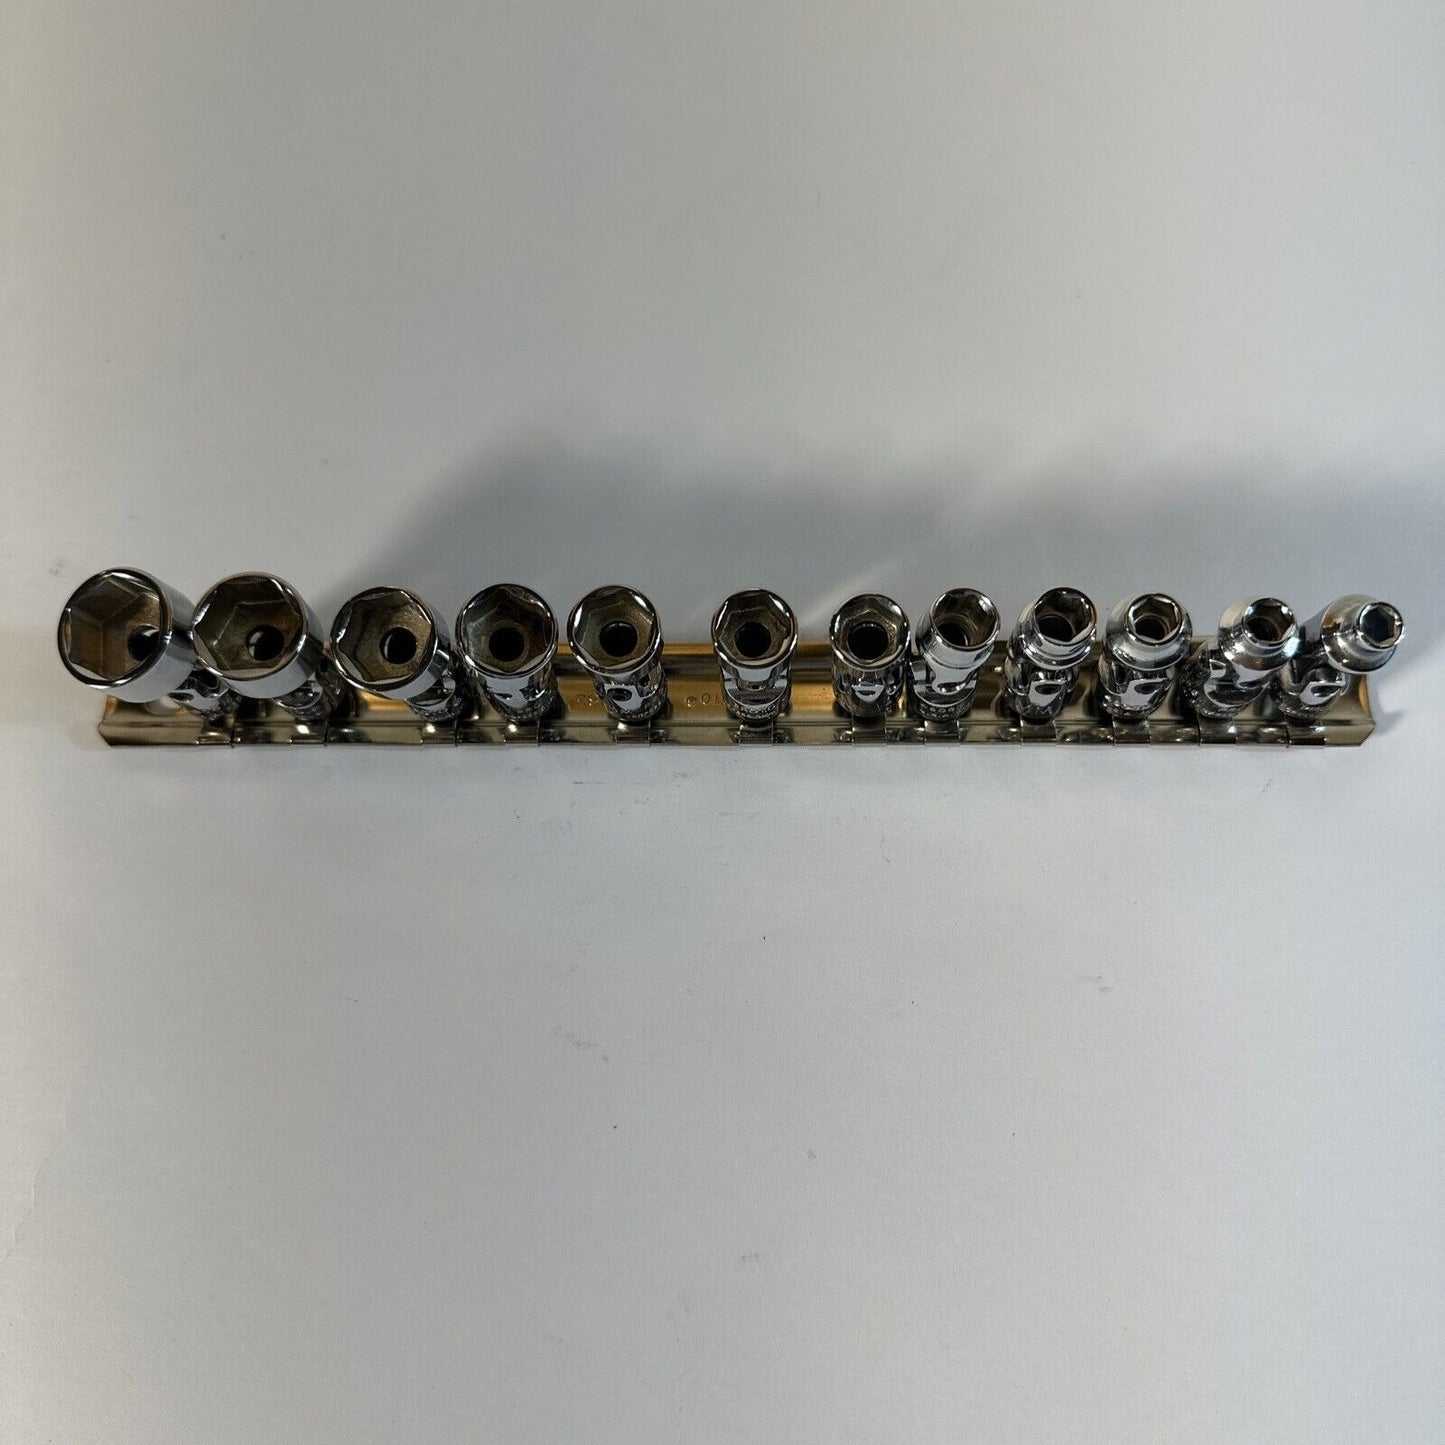 PROTO Socket Set: 1/4 in Drive Size, 12 Pieces, 5 mm to 15 mm Socket Size Range